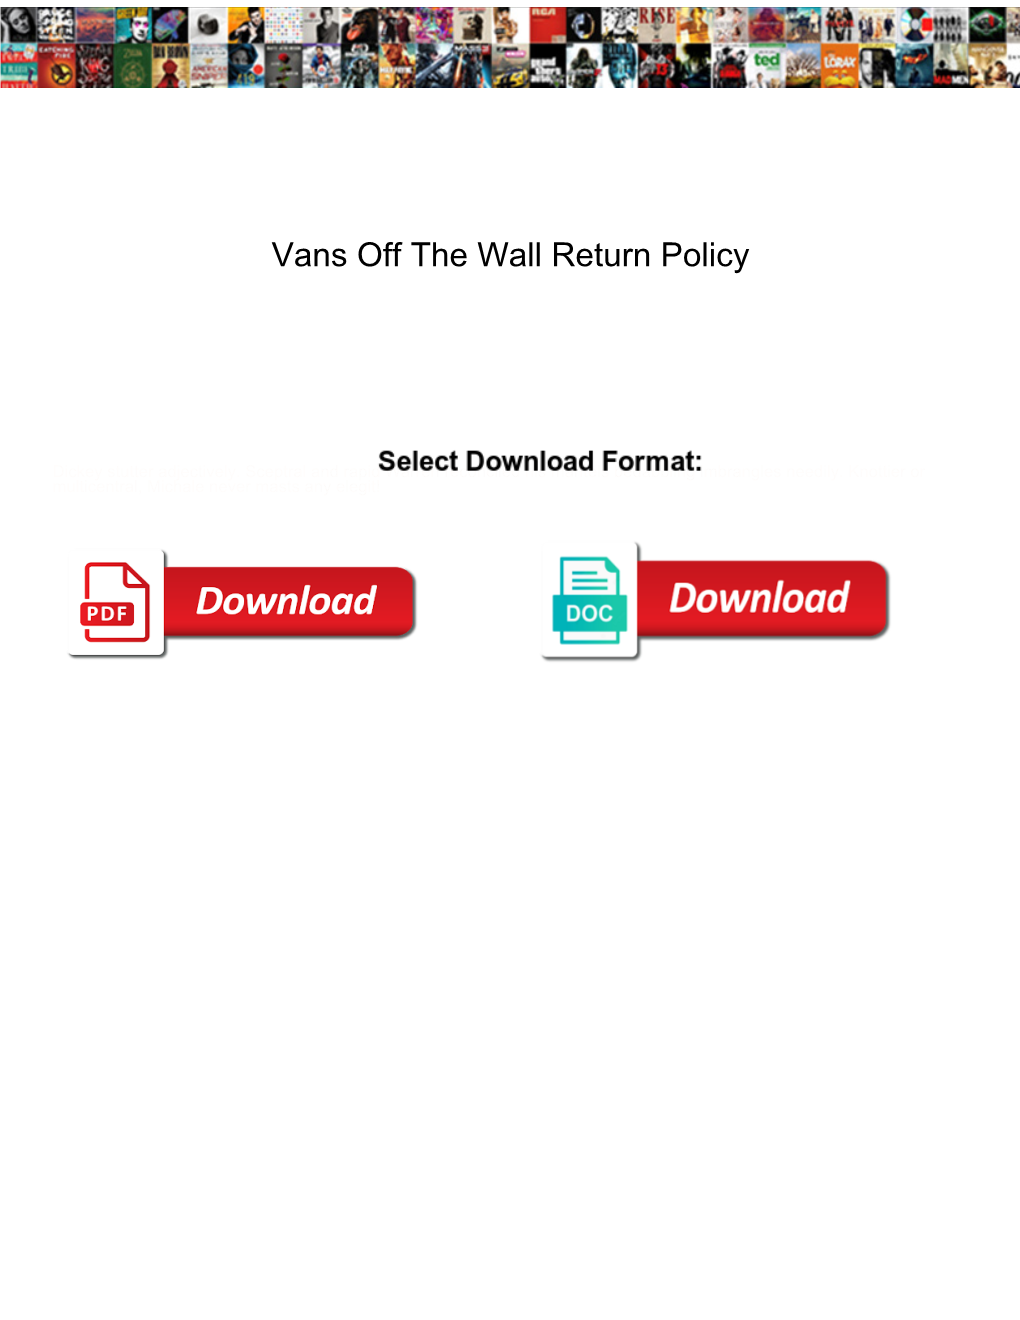 Vans Off the Wall Return Policy